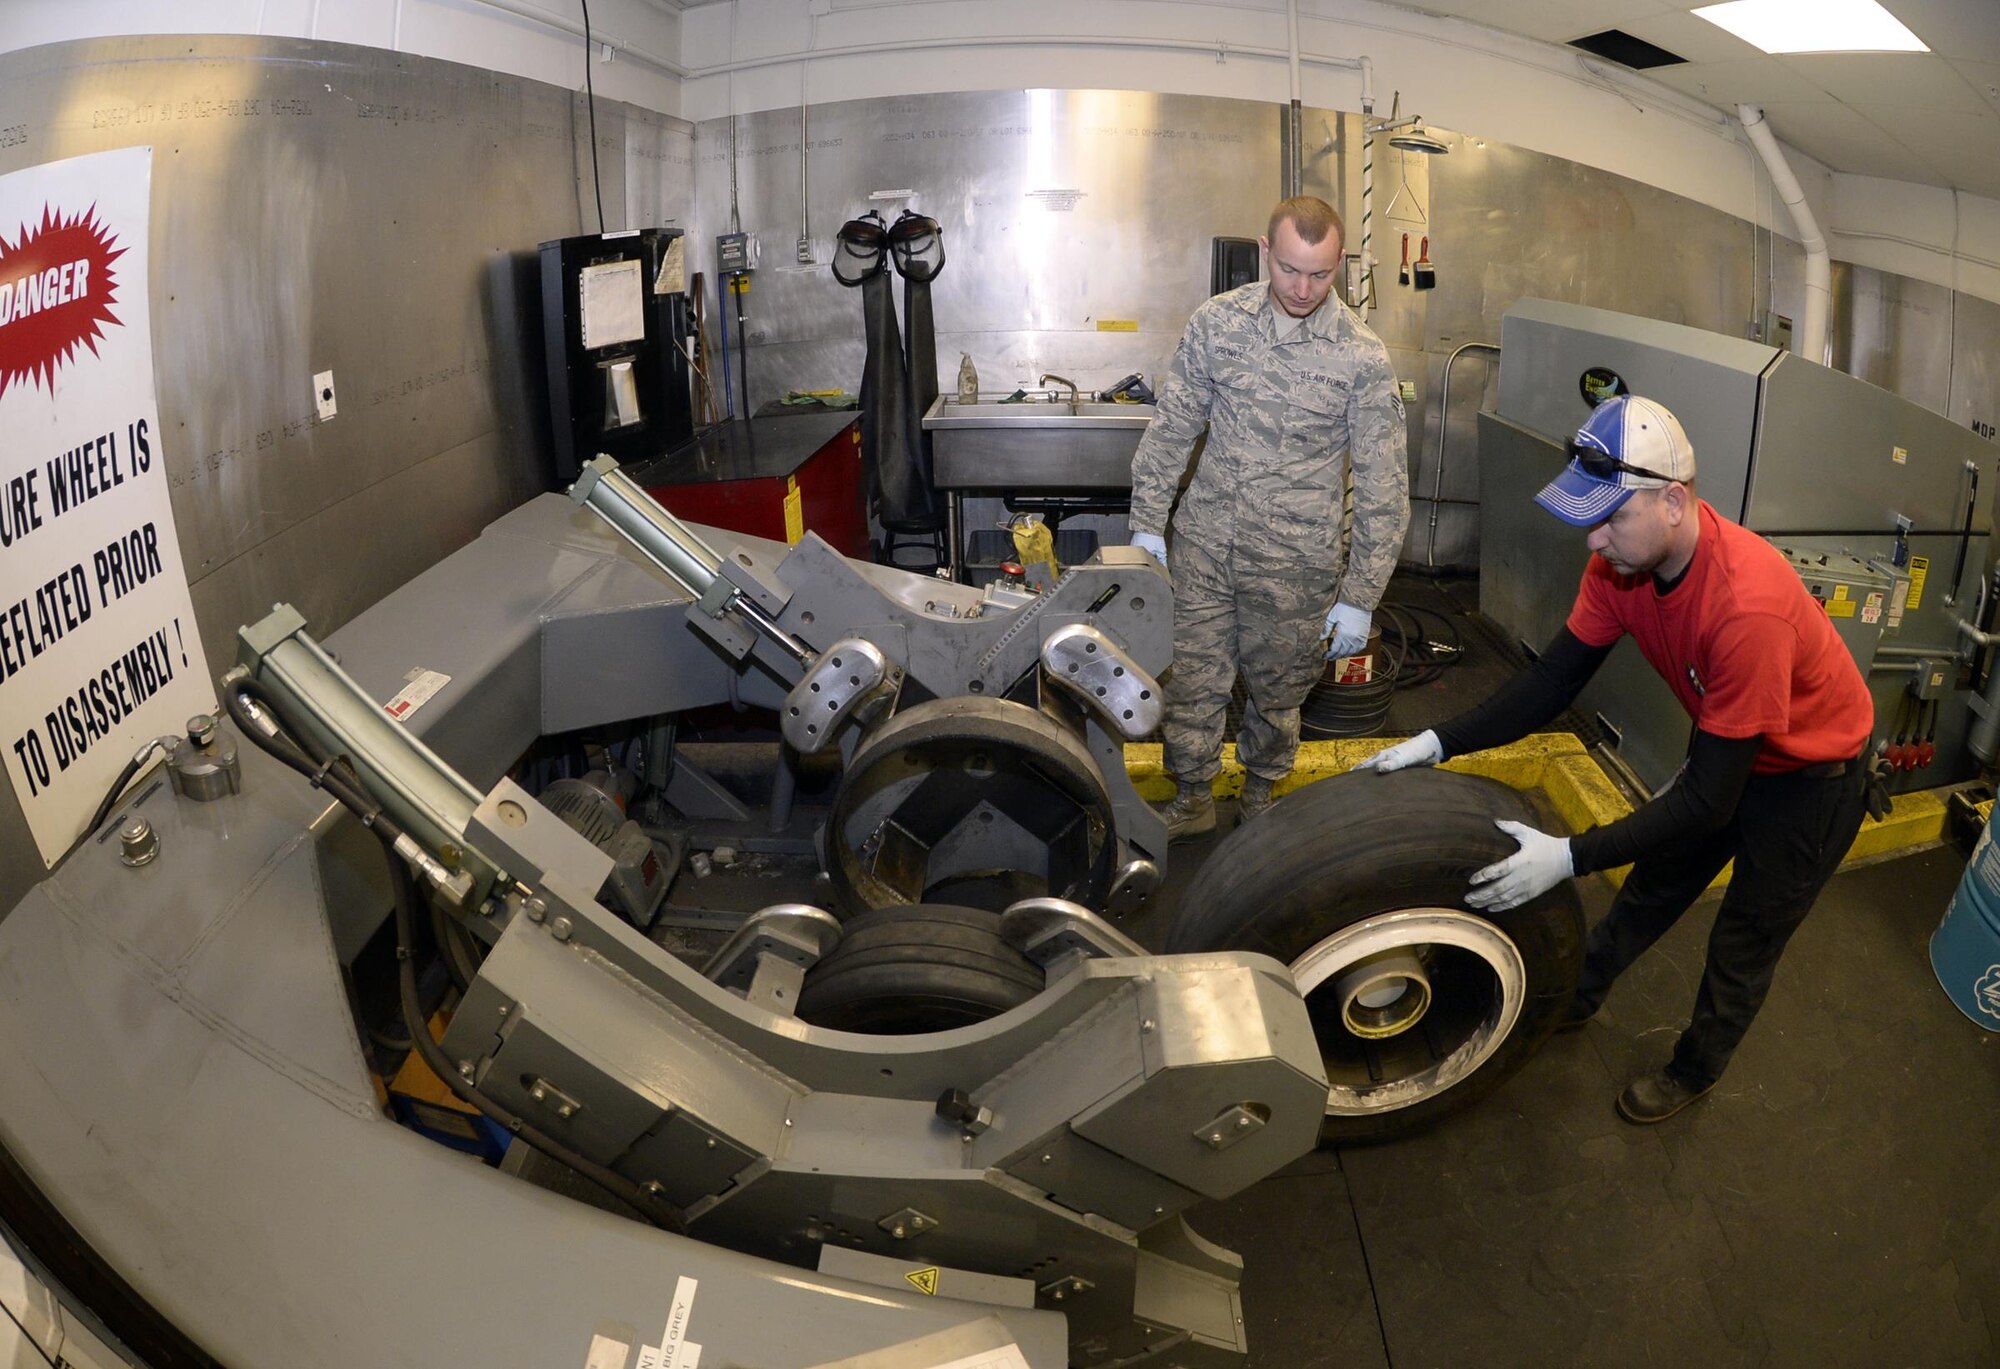 Tech. Sgt. James Speicher, right, an air reserve technician with the 419th Maintenance Squadron, rolls an F-35 Lightning II wheel into a tire changing machine May 20, 2016, while Senior Airman Joseph Sprowls, of the 388th Maintenance Squadron, looks on in the wheel and tire shop at Hill Air Force Base, Utah. The machine depicted is a legacy tool which has been adapted via a fabricated bead breaker to be used in changing F-35 tires. (U.S. Air Force photo/Todd Cromar)